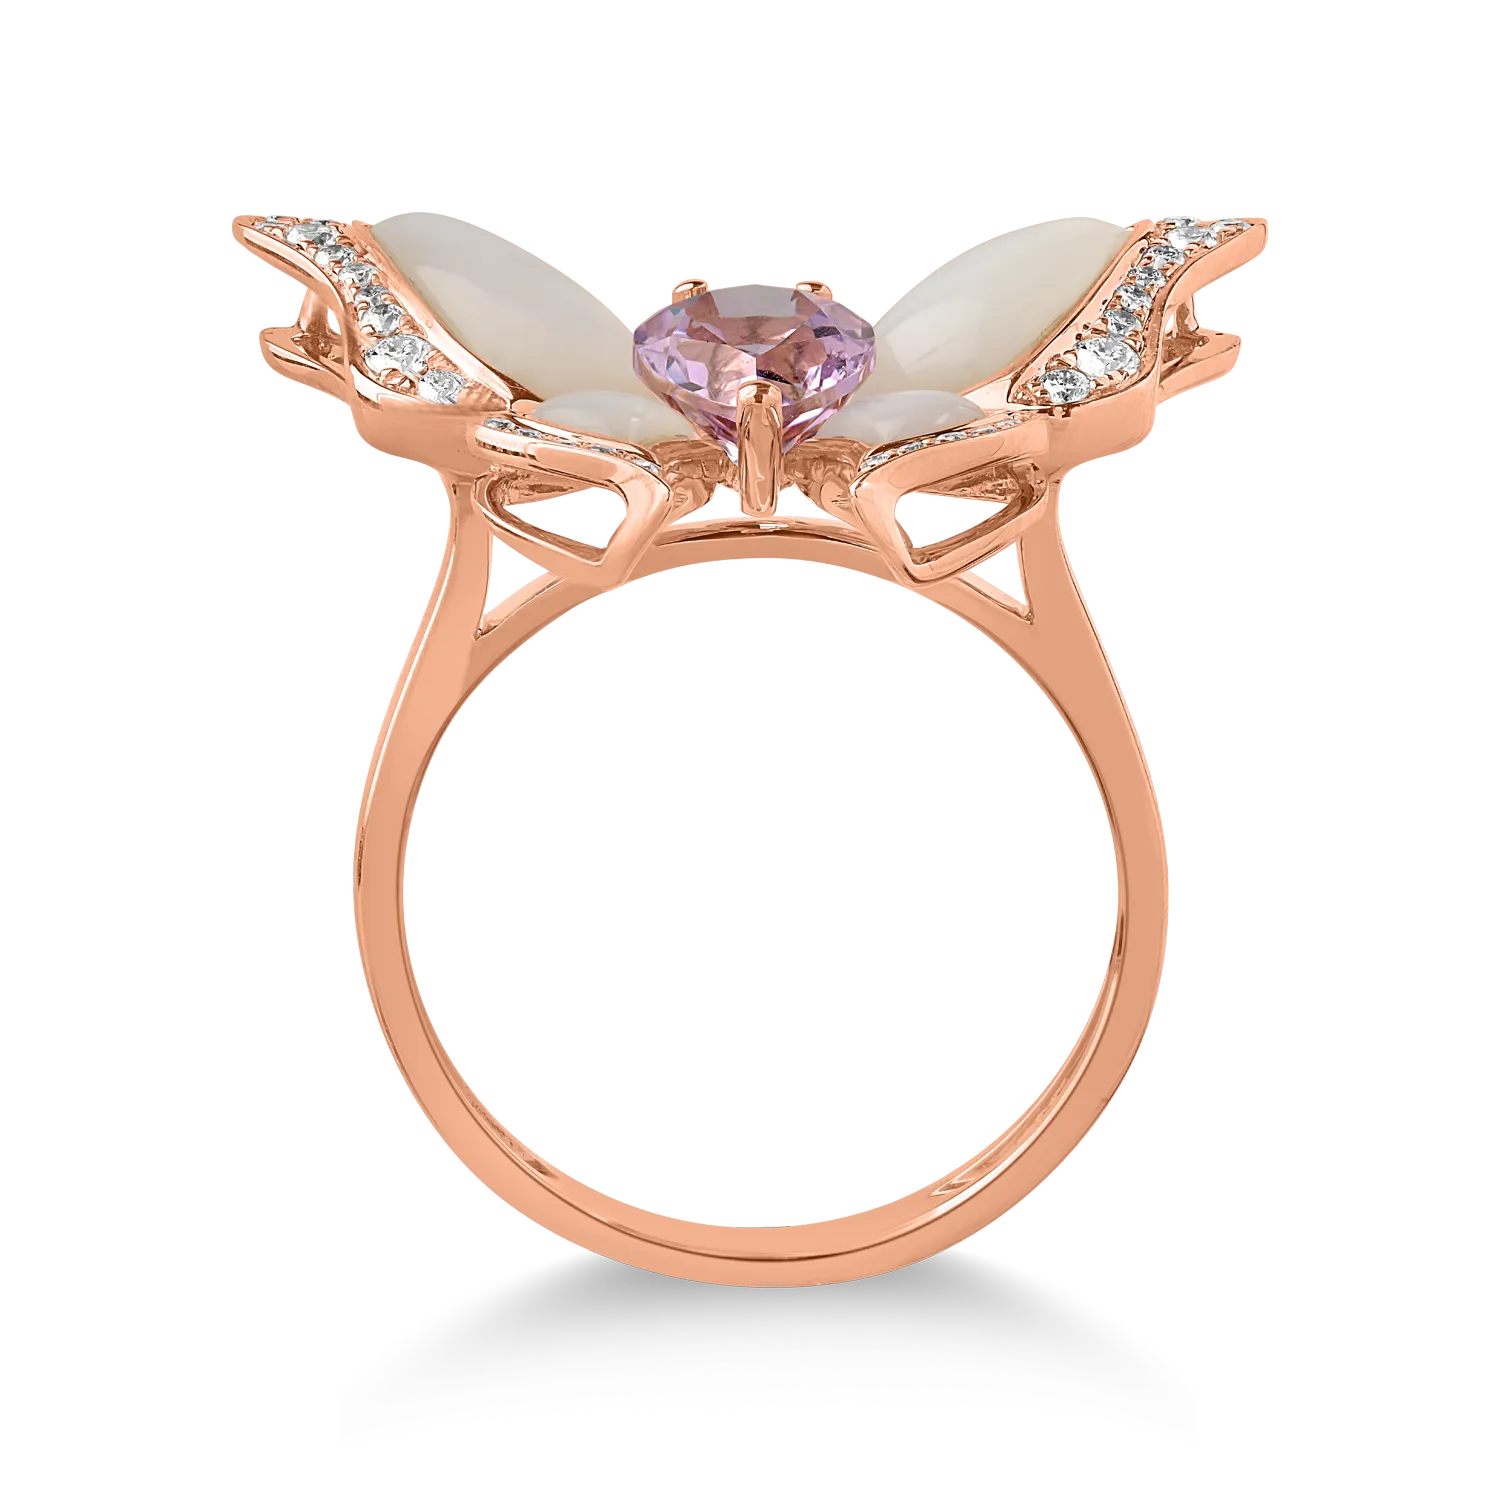 18K rose gold butterfly ring with 5.08ct precious and semiprecious stones